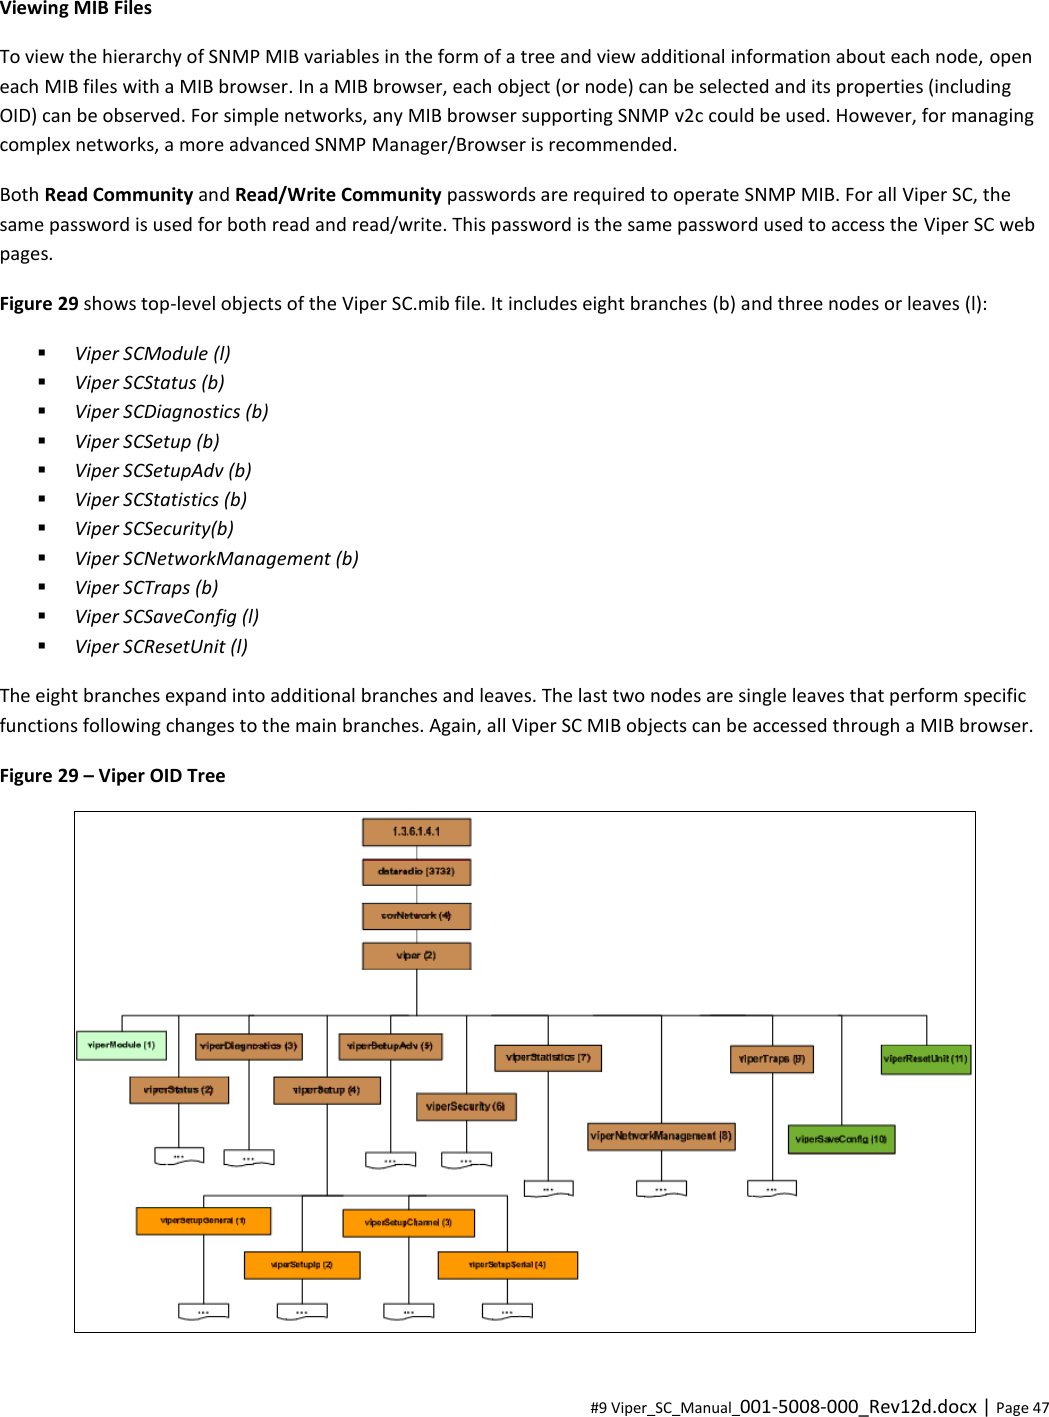  #9 Viper_SC_Manual_001-5008-000_Rev12d.docx | Page 47 Viewing MIB Files To view the hierarchy of SNMP MIB variables in the form of a tree and view additional information about each node, open each MIB files with a MIB browser. In a MIB browser, each object (or node) can be selected and its properties (including OID) can be observed. For simple networks, any MIB browser supporting SNMP v2c could be used. However, for managing complex networks, a more advanced SNMP Manager/Browser is recommended. Both Read Community and Read/Write Community passwords are required to operate SNMP MIB. For all Viper SC, the same password is used for both read and read/write. This password is the same password used to access the Viper SC web pages. Figure 29 shows top-level objects of the Viper SC.mib file. It includes eight branches (b) and three nodes or leaves (l):  Viper SCModule (l)  Viper SCStatus (b)  Viper SCDiagnostics (b)  Viper SCSetup (b)  Viper SCSetupAdv (b)  Viper SCStatistics (b)  Viper SCSecurity(b)  Viper SCNetworkManagement (b)  Viper SCTraps (b)  Viper SCSaveConfig (l)  Viper SCResetUnit (l) The eight branches expand into additional branches and leaves. The last two nodes are single leaves that perform specific functions following changes to the main branches. Again, all Viper SC MIB objects can be accessed through a MIB browser. Figure 29 – Viper OID Tree  